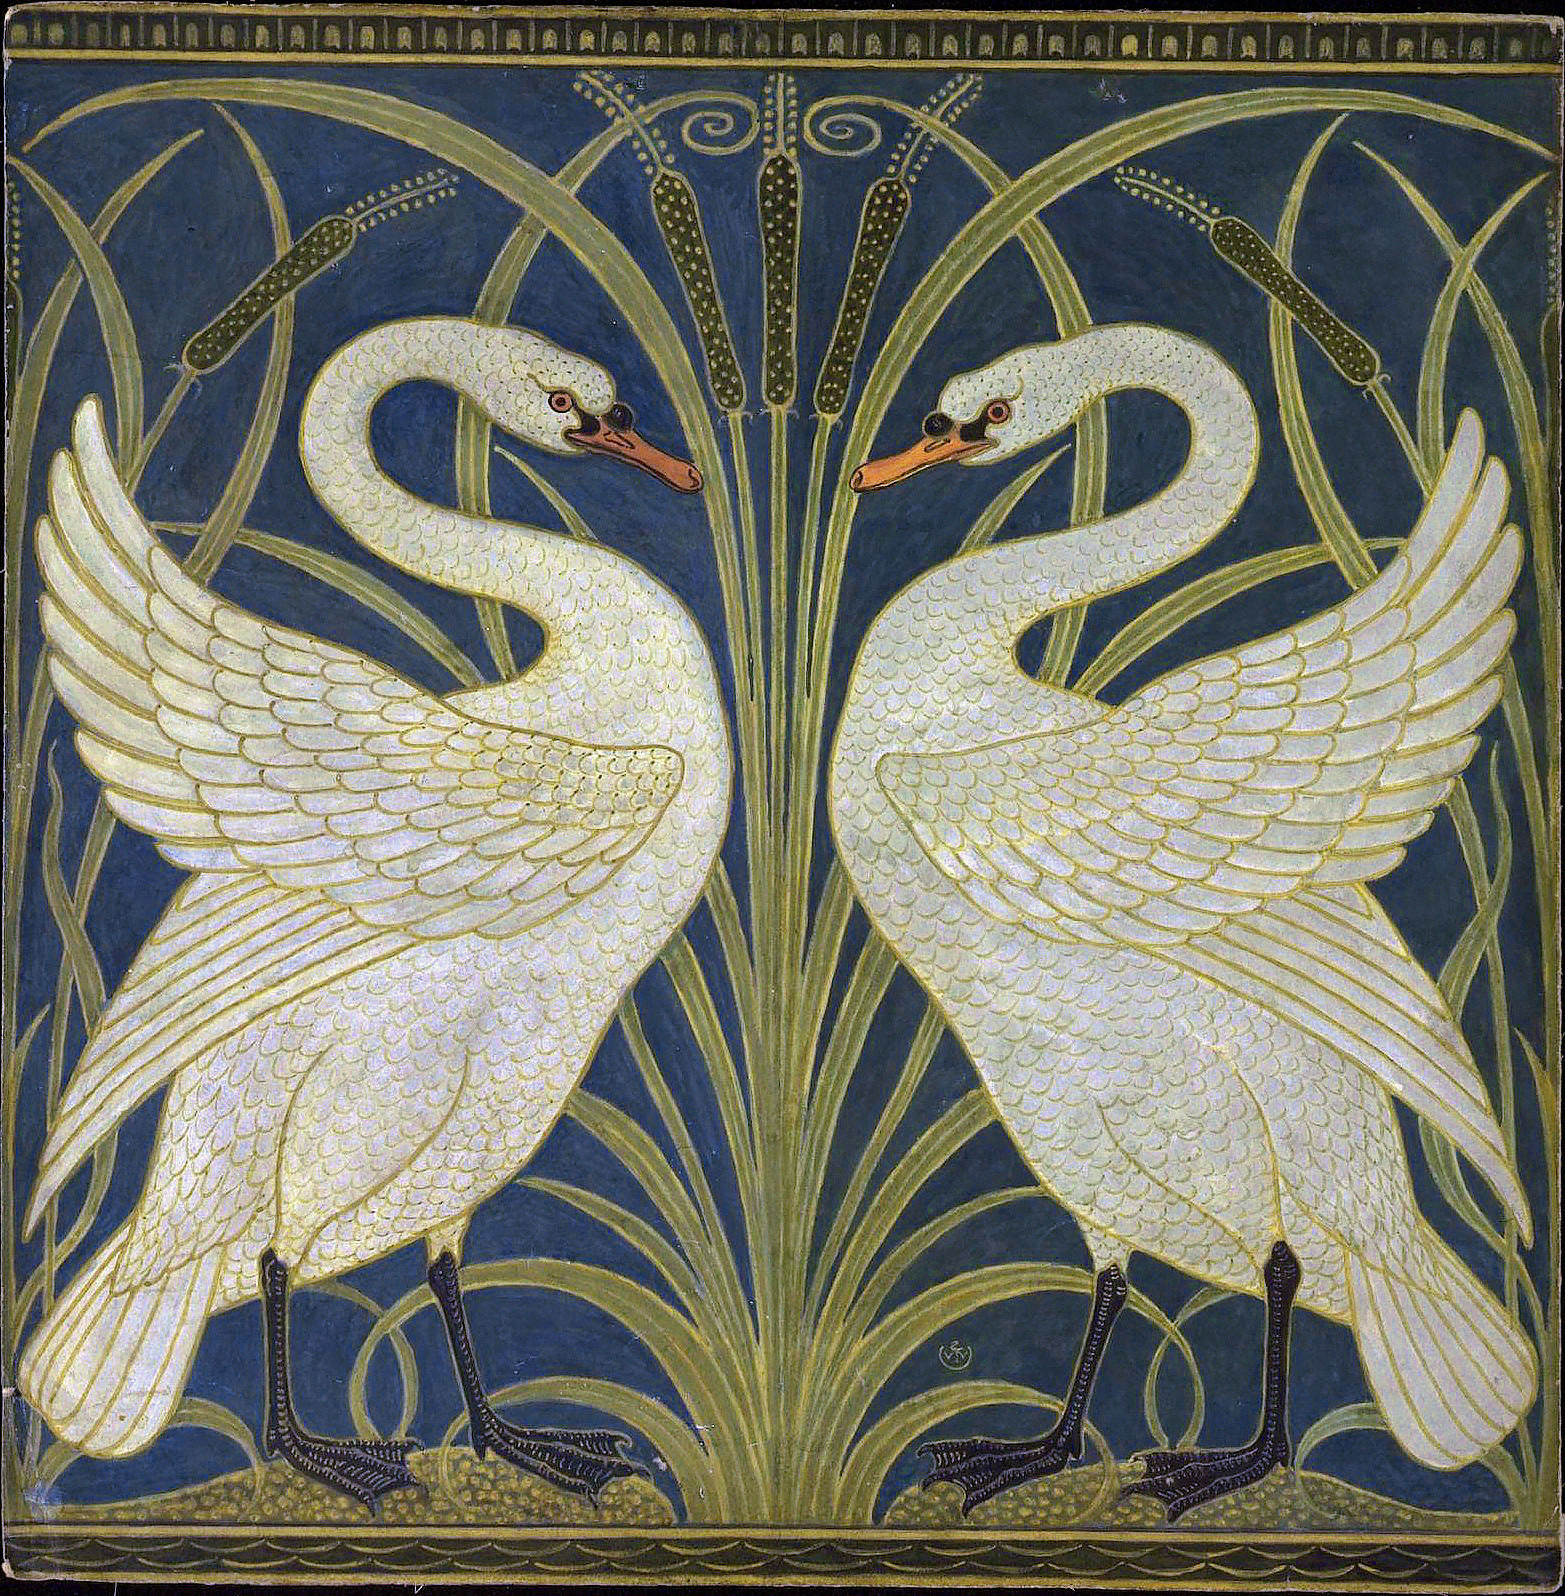 A symmetrical painting of two swan facing each other with iris and tall grass behind them